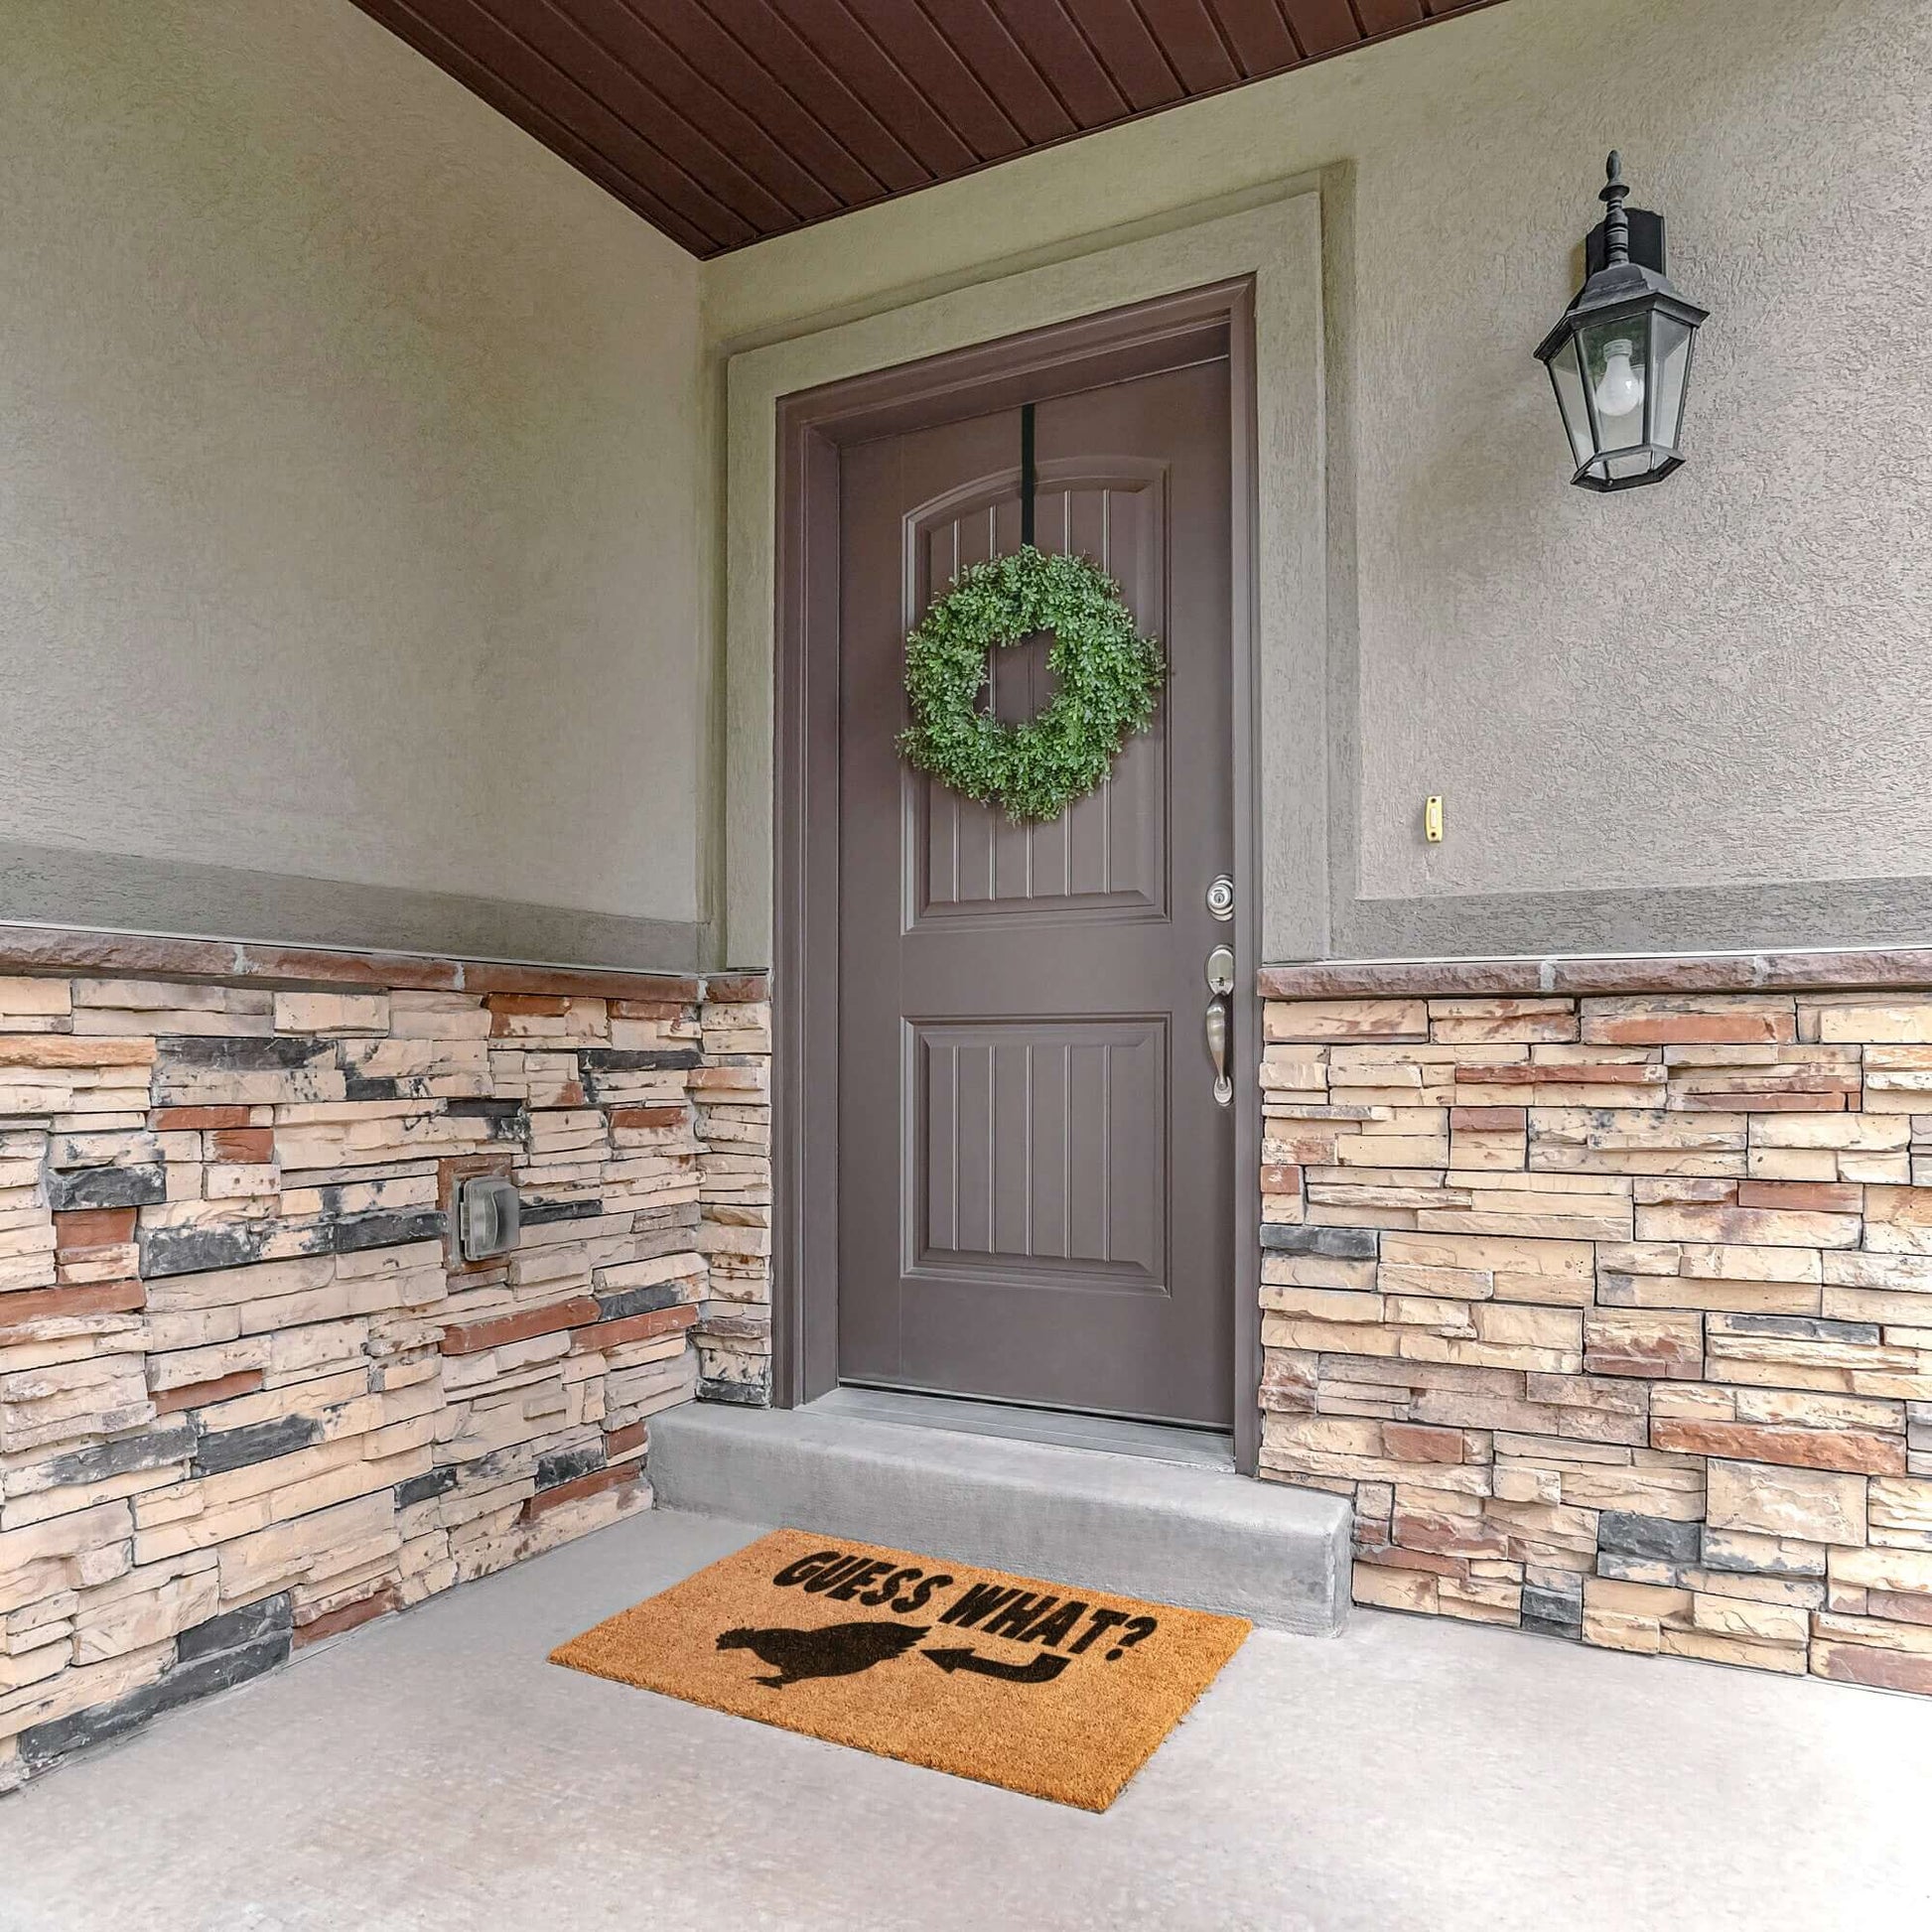 Tan color coconut coir fiber doormat with a Guess what chicken butt graphic printed in black.